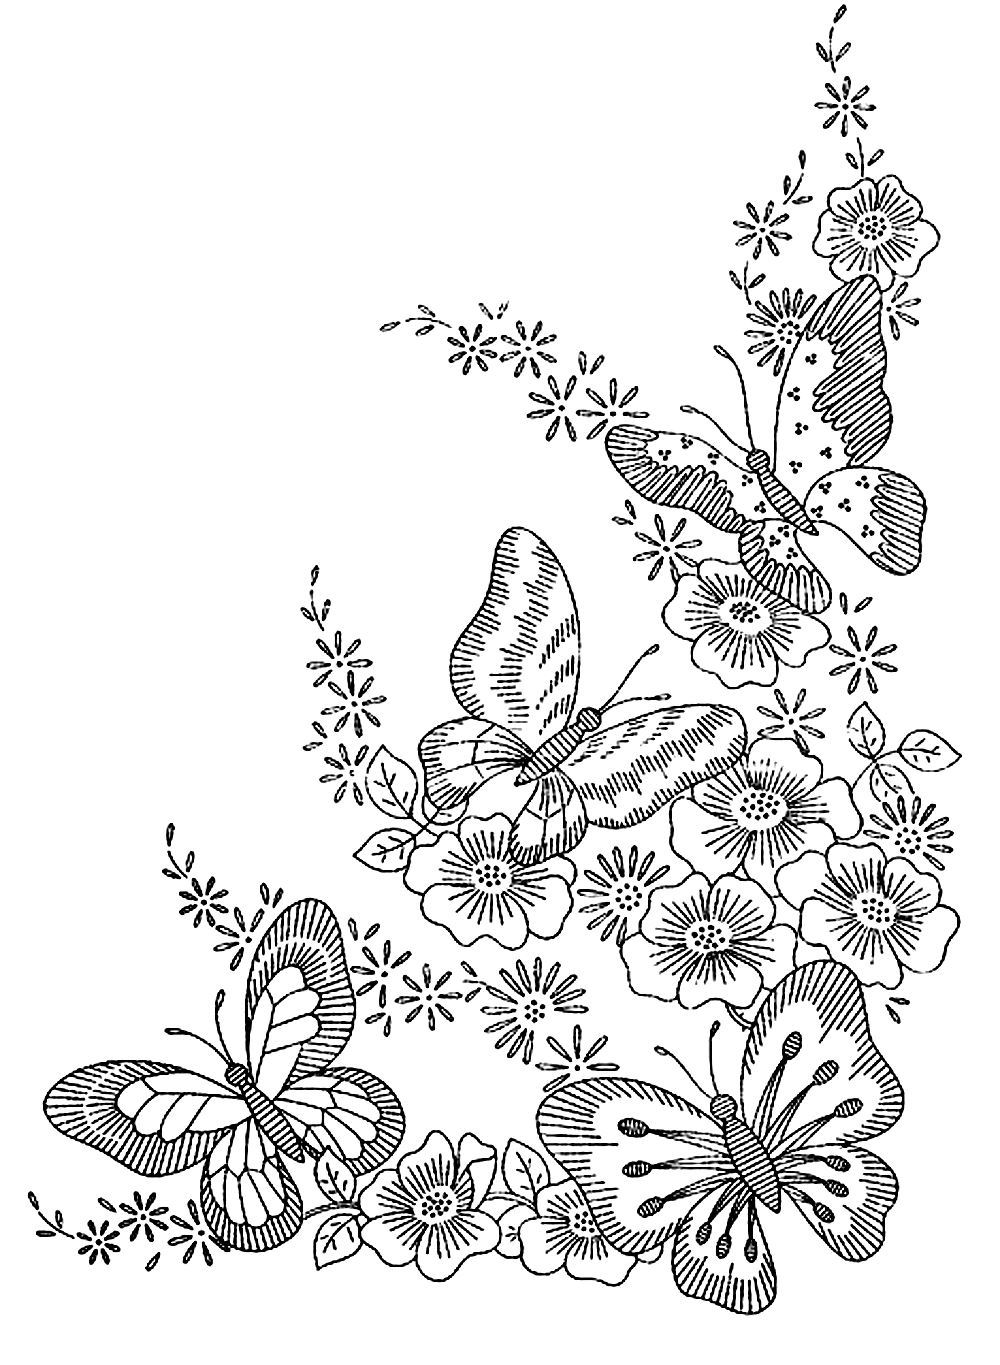 Difficult Flower Coloring Pages at GetDrawings.com | Free ...